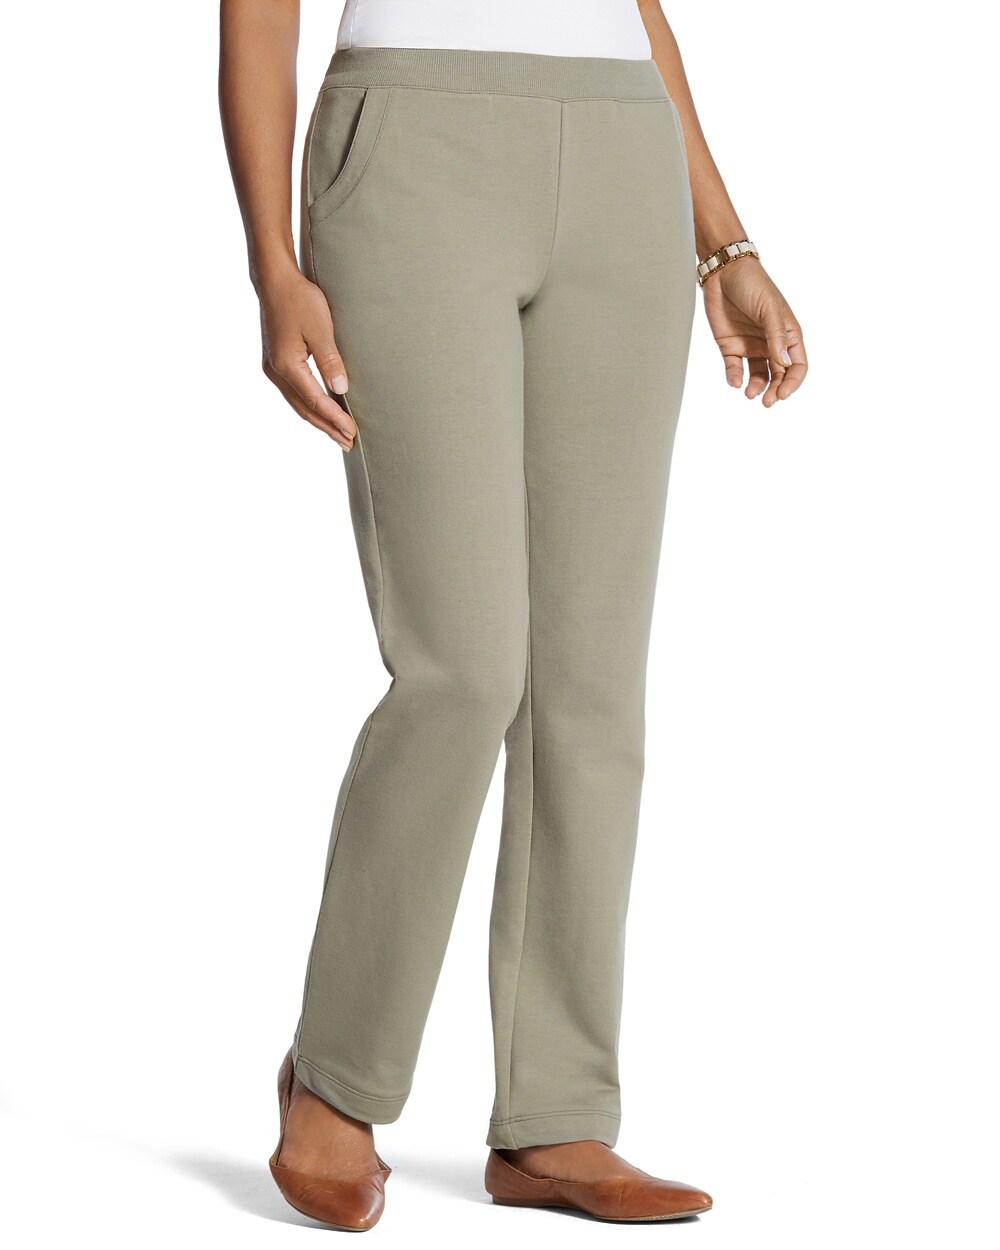 Zenergy Knit Collection Pants in Vetiver